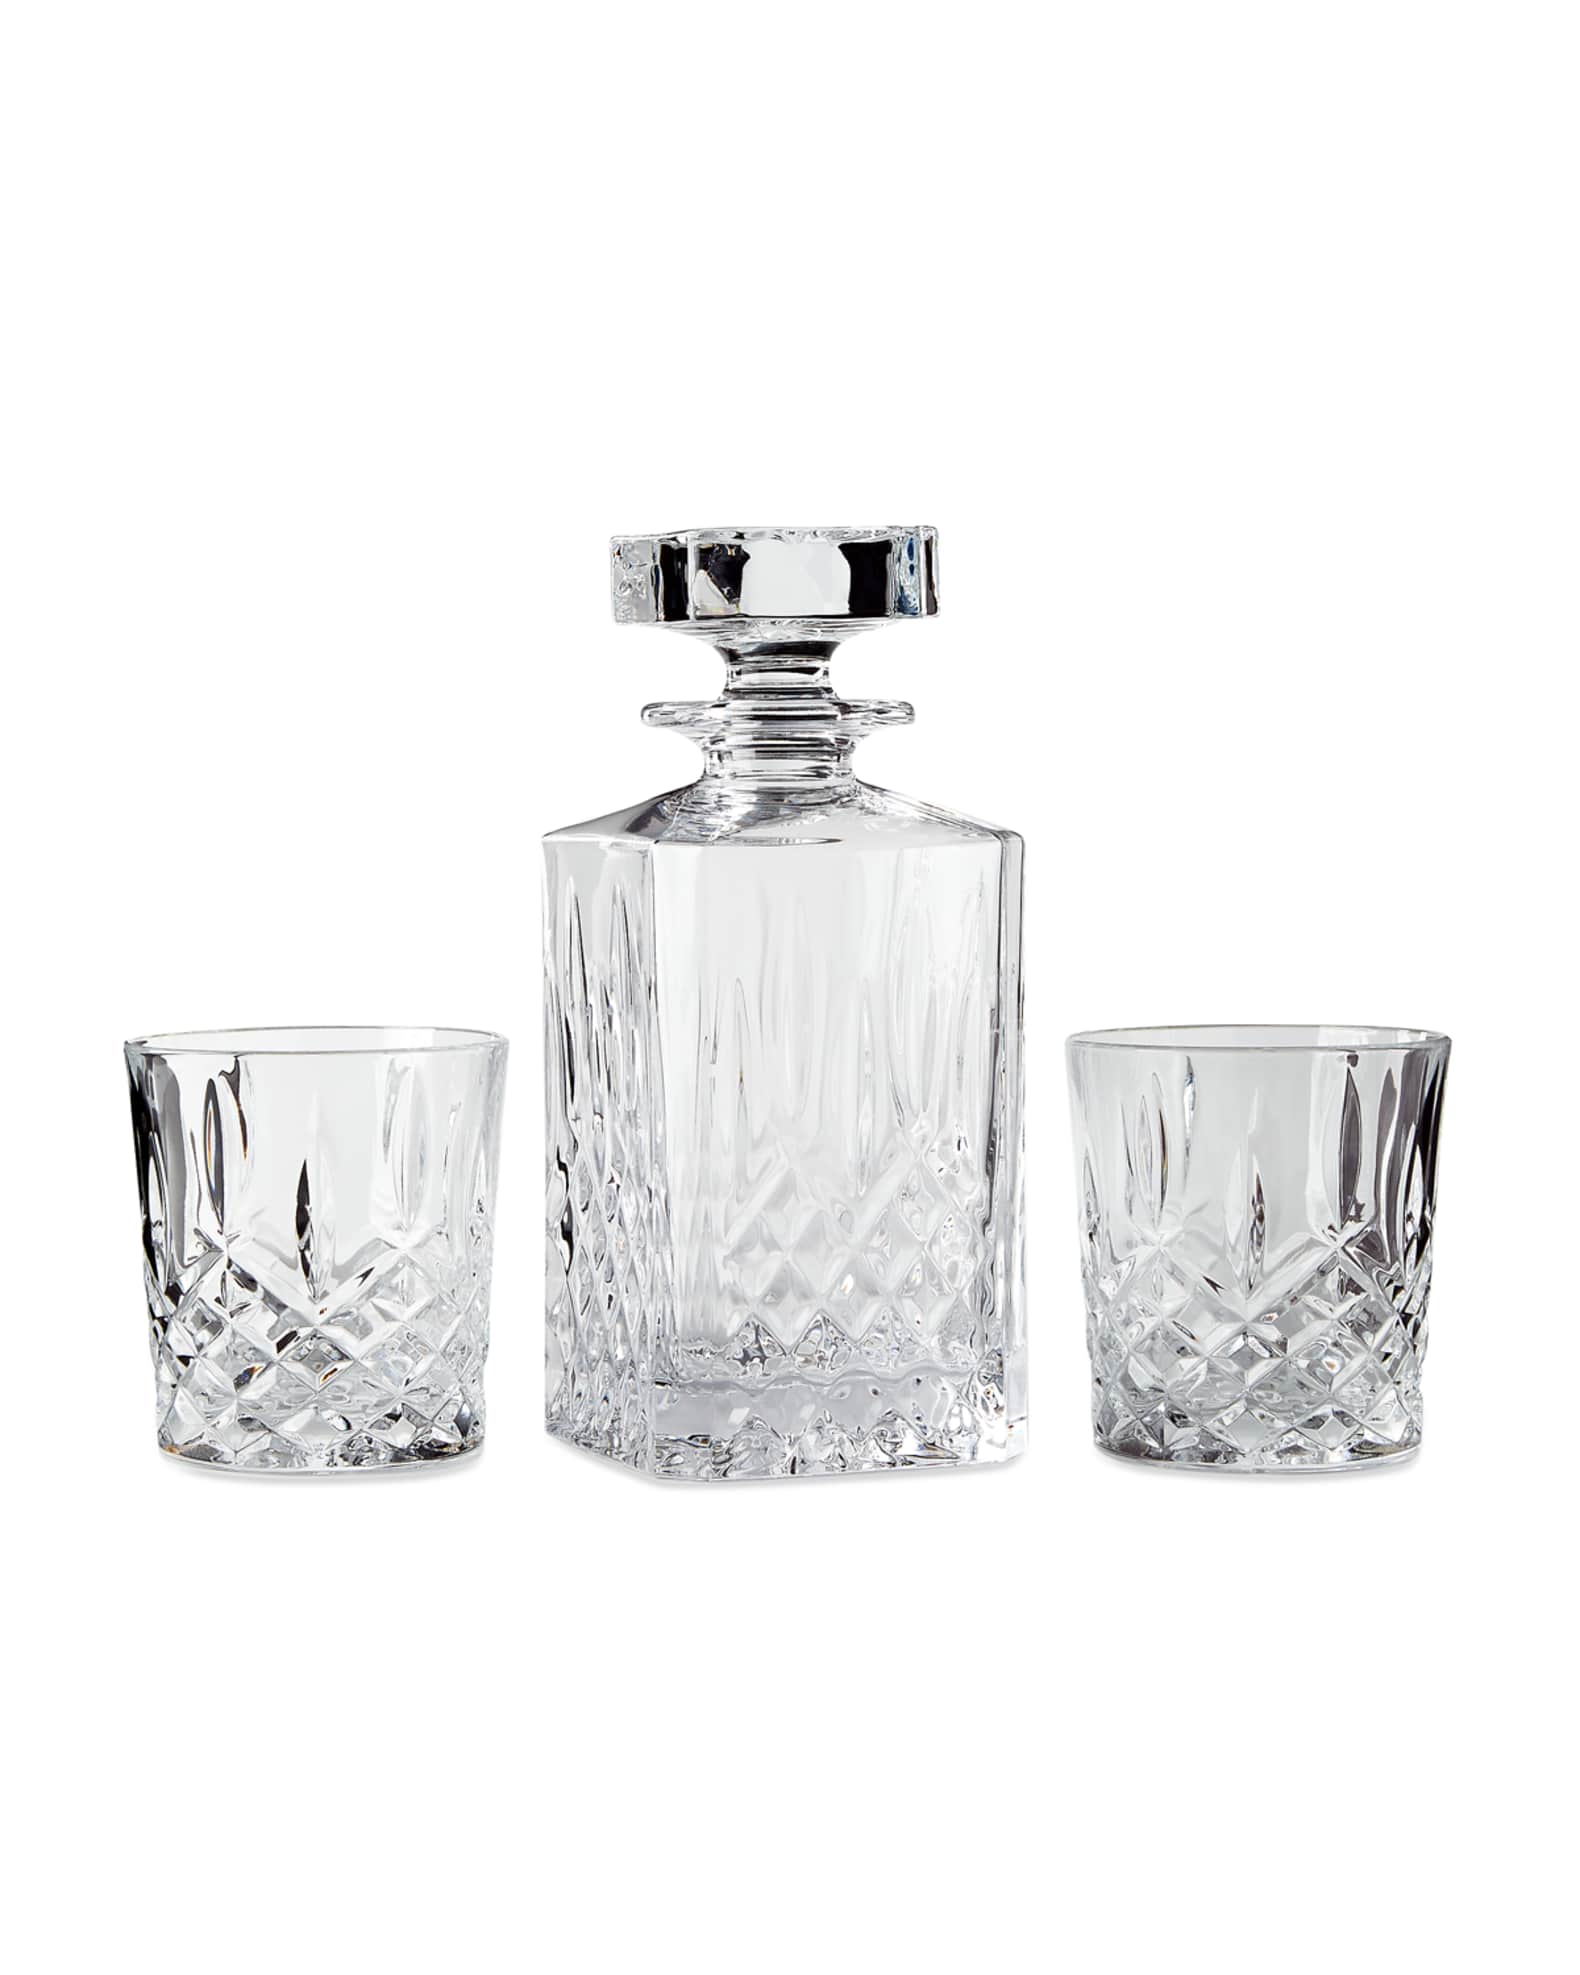 Markham Stacking Decanter & Tumbler Set of 2, FREE ETCHING (on decanter  stopper)